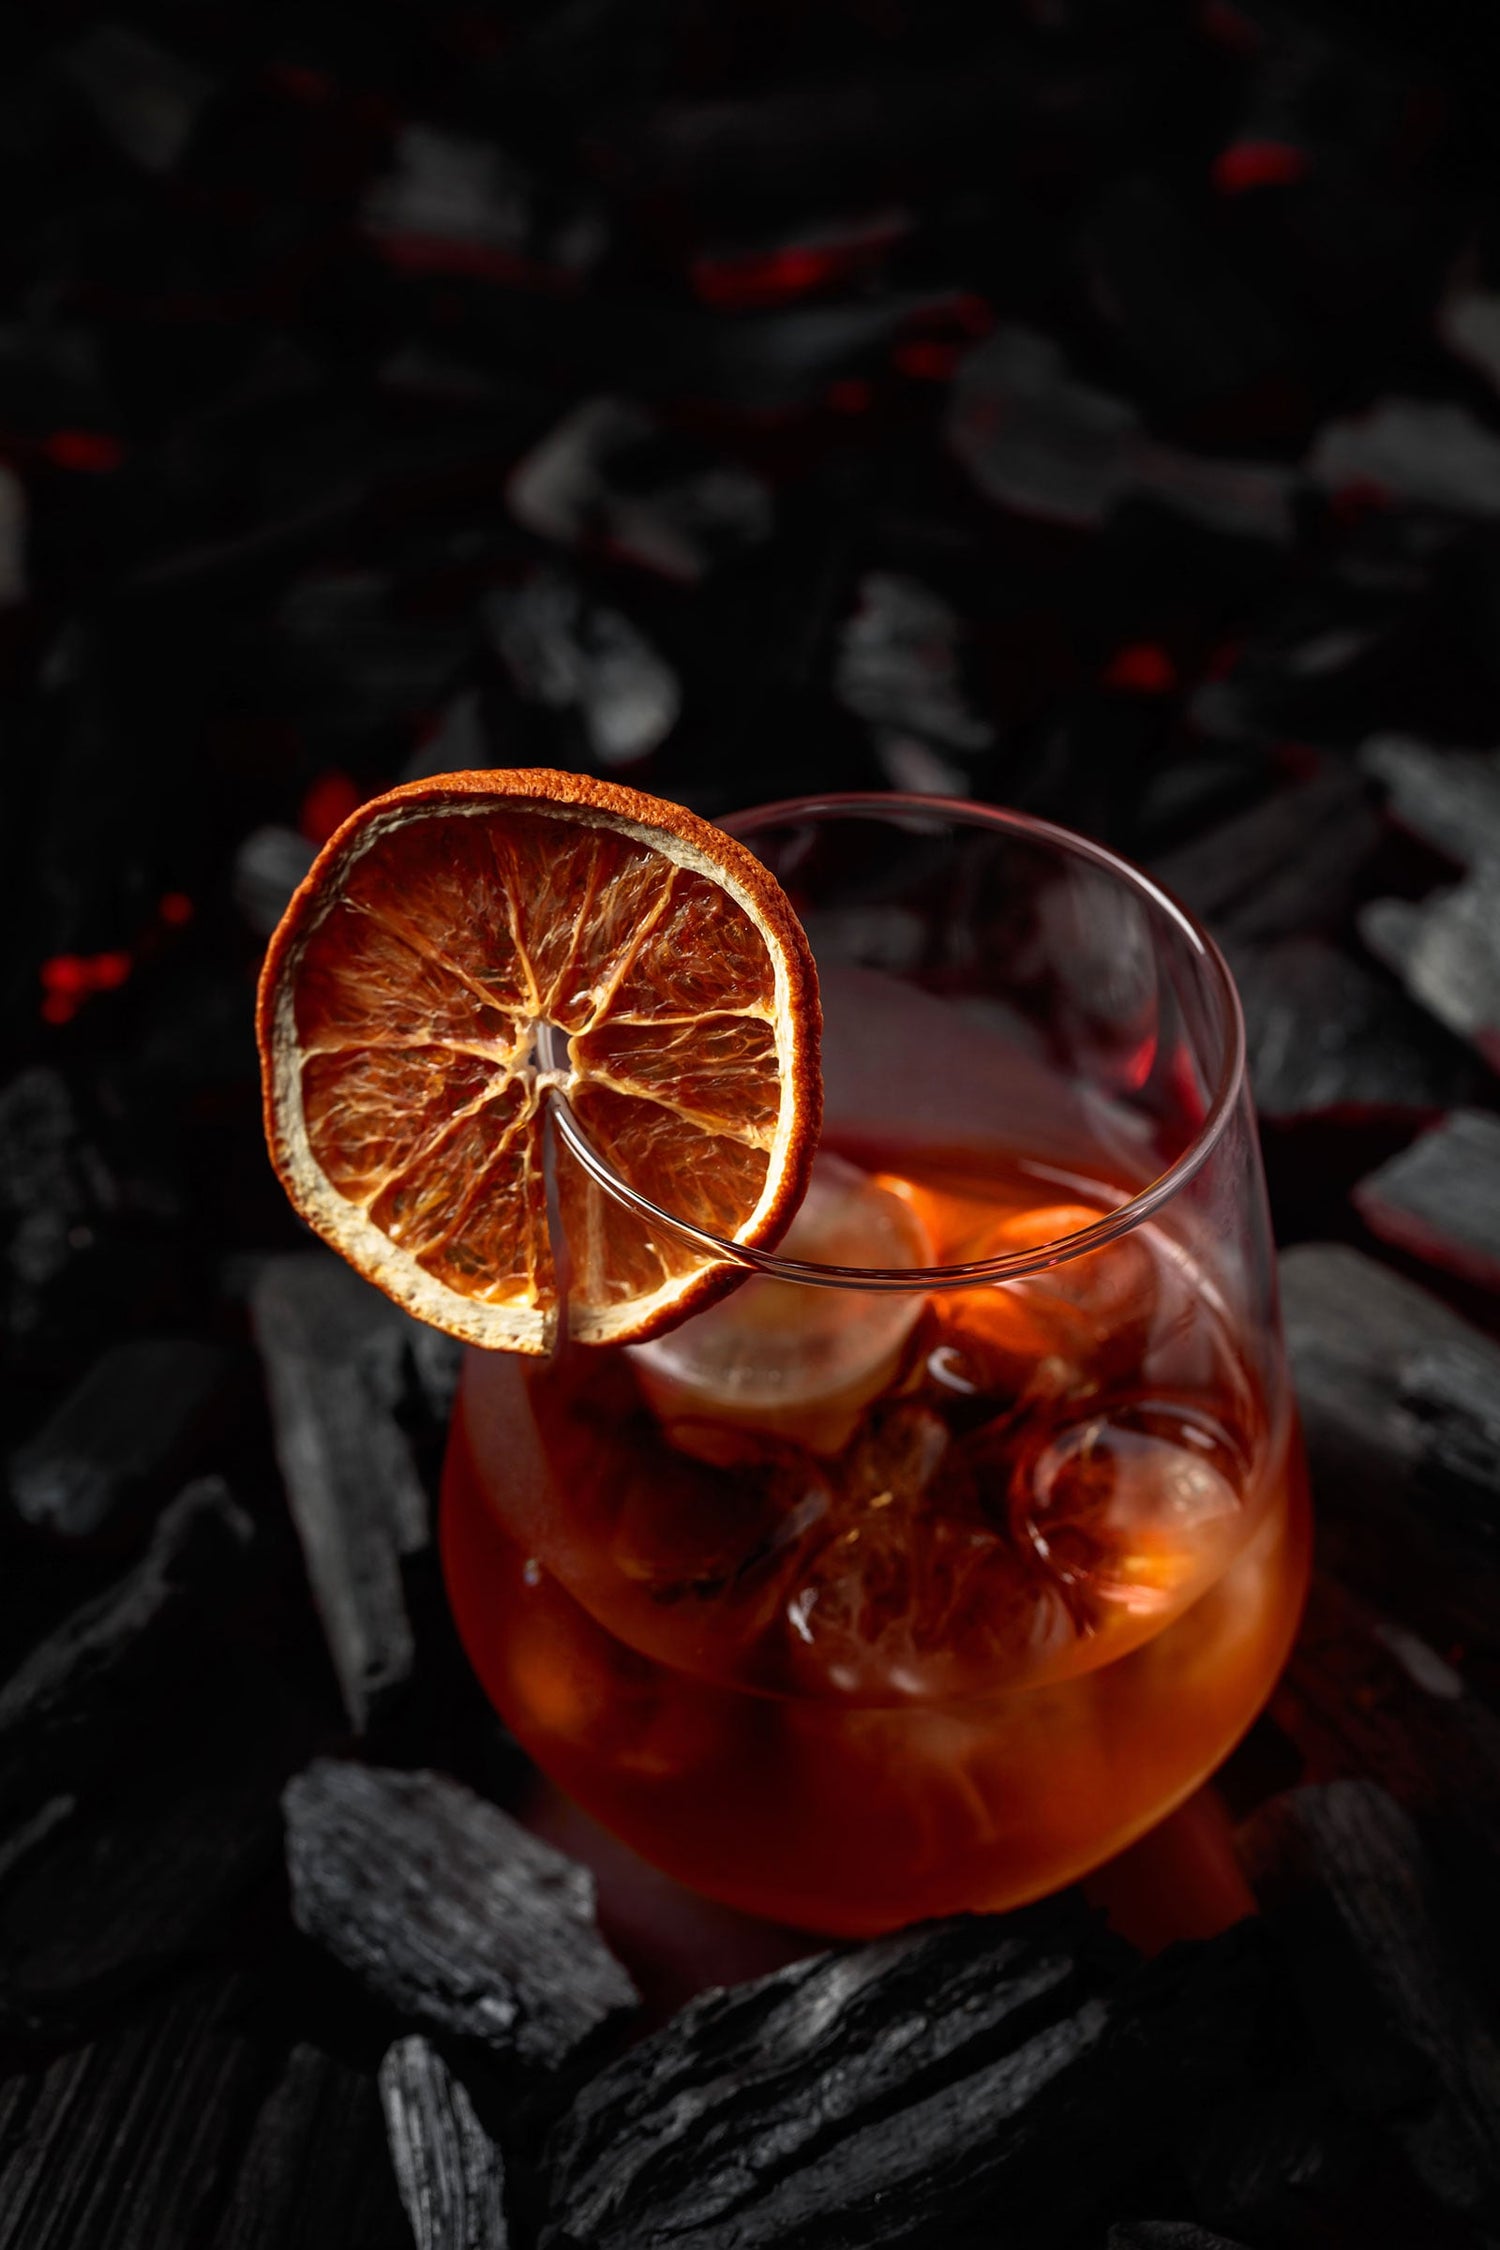 red cocktail drink in a stemless glass with a dehydrated fruit garnish, against a black background